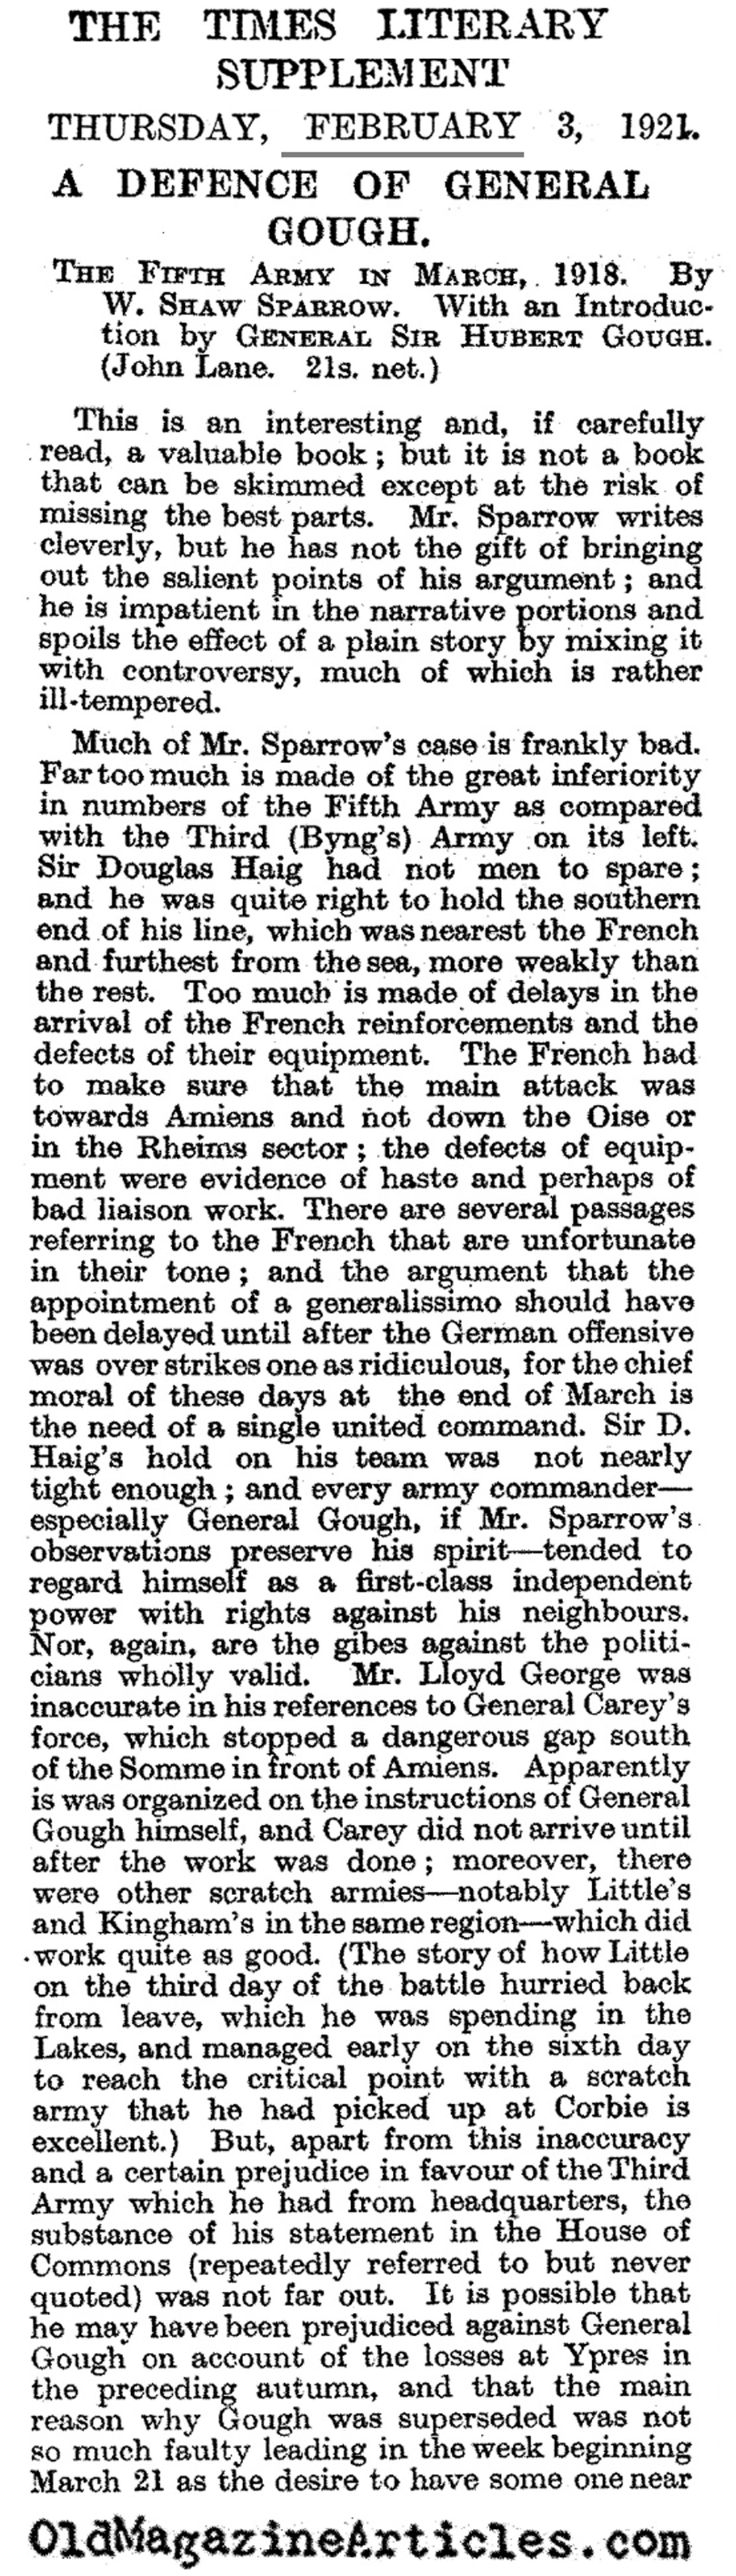 General Herbert Gough and the Collapse of the Fifth Army  (Times Literary Supplement, 1921)